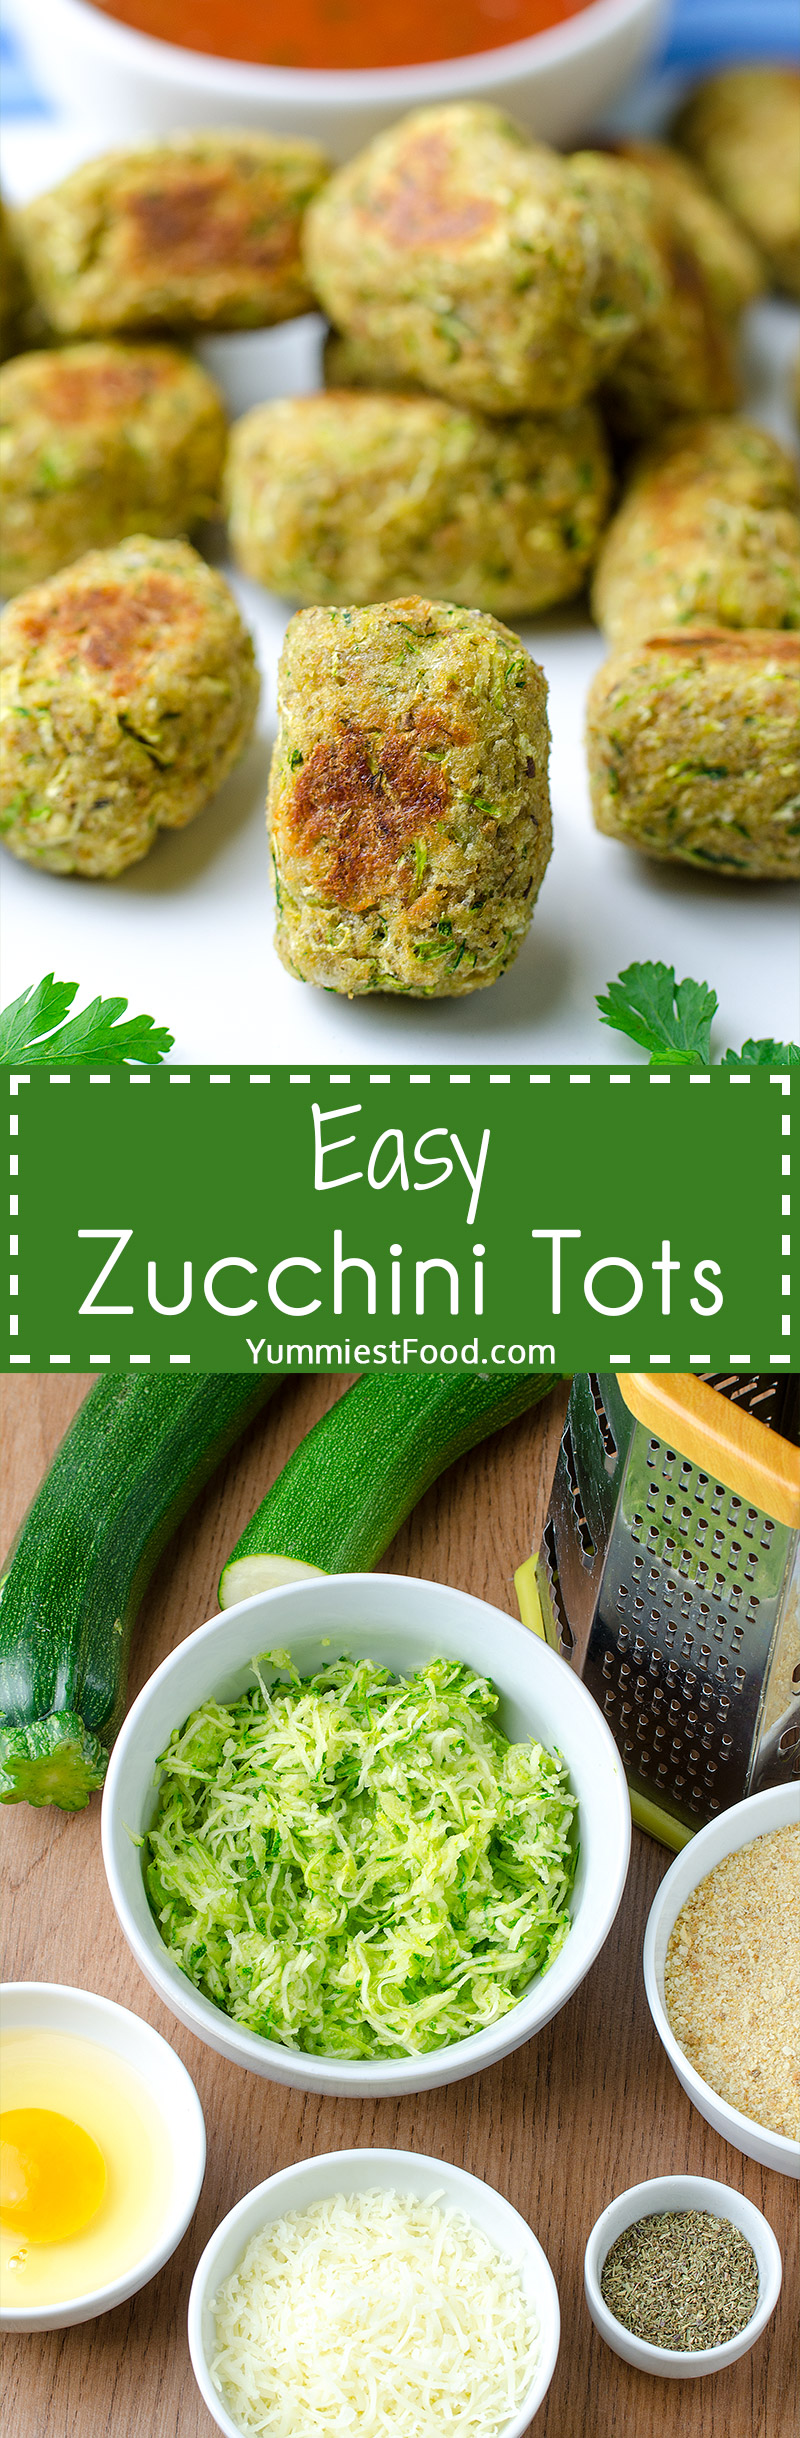 EASY ZUCCHINI TOTS - Just 5 ingredients and only 5 minutes of prepare